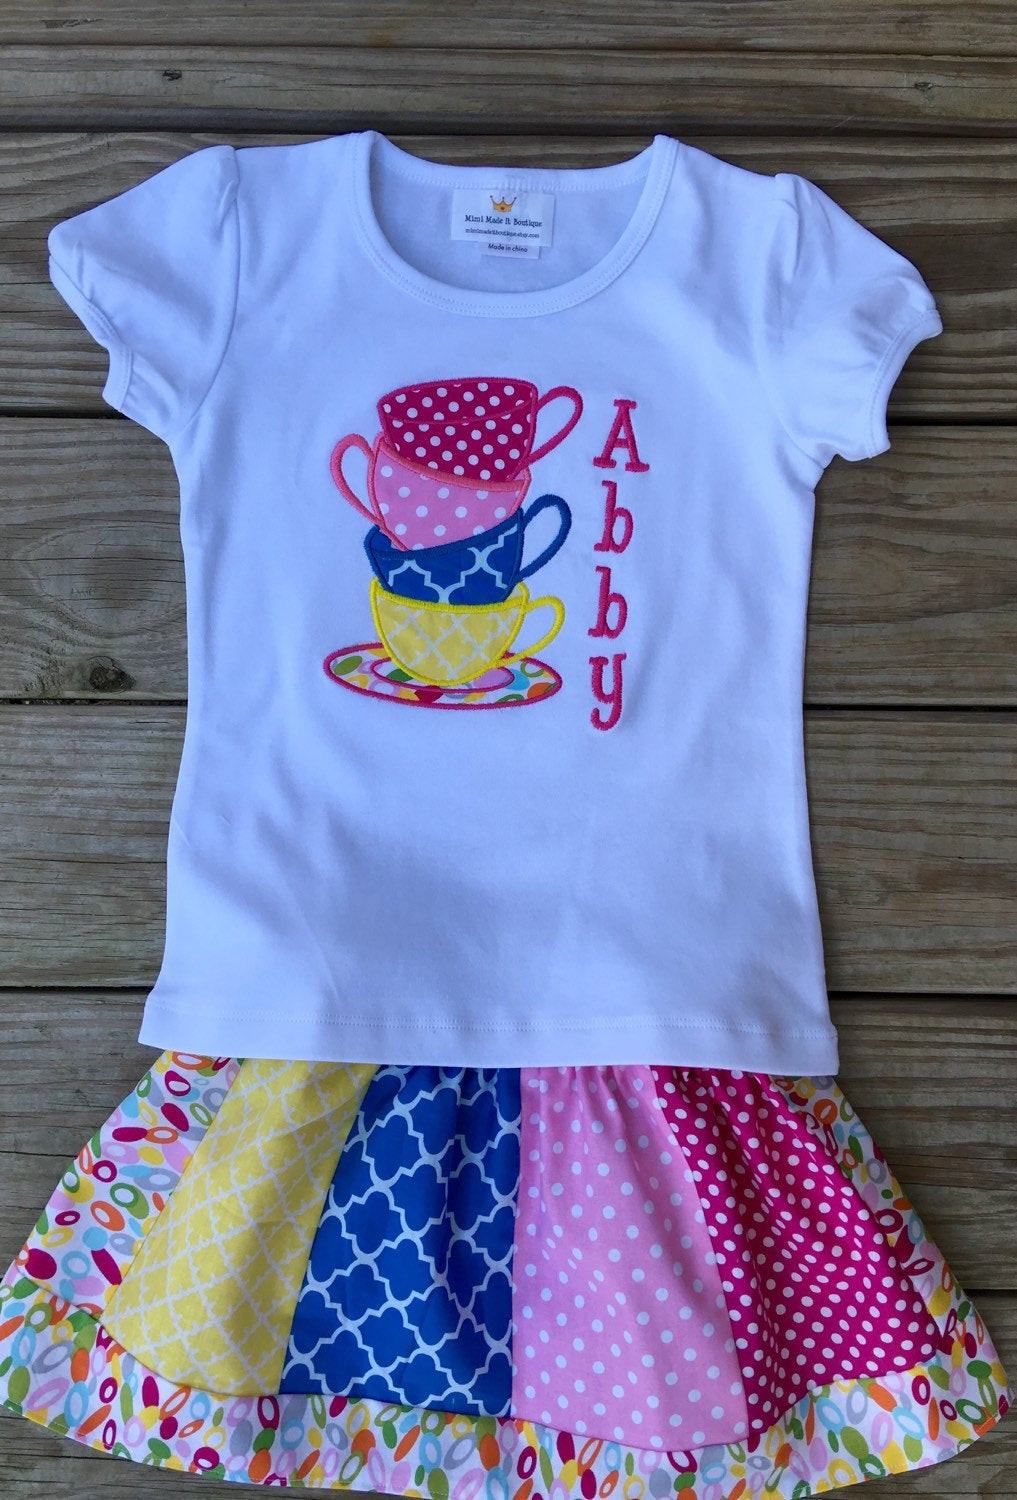 Tea Party Outfit Ideas
 Tea Party birthday shirt or outfit